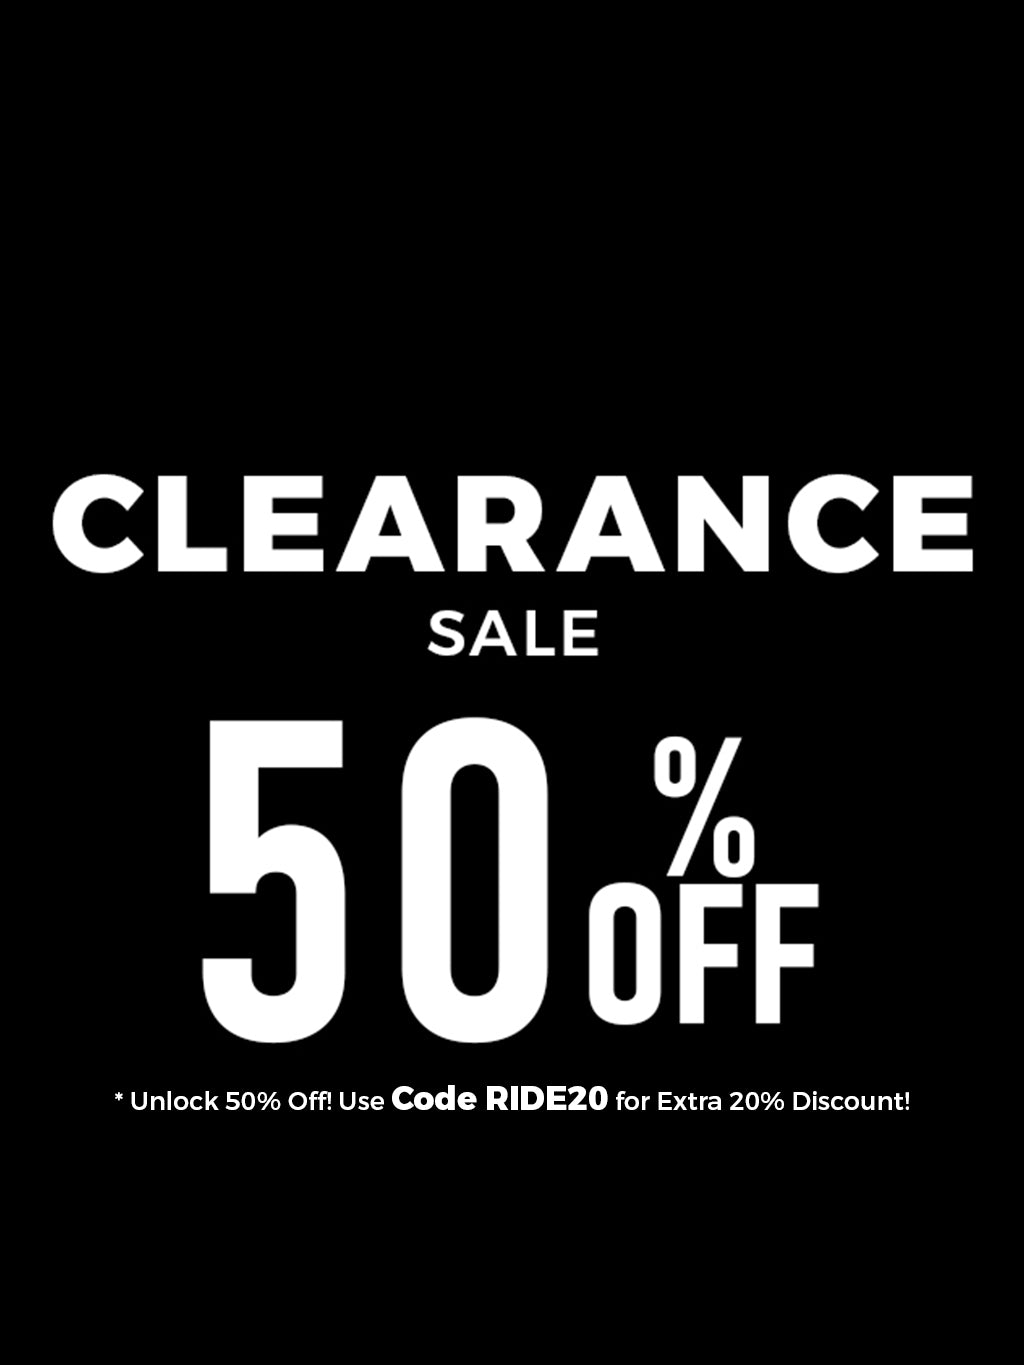 Clearance Sale on Motorcycle Luggage Bags